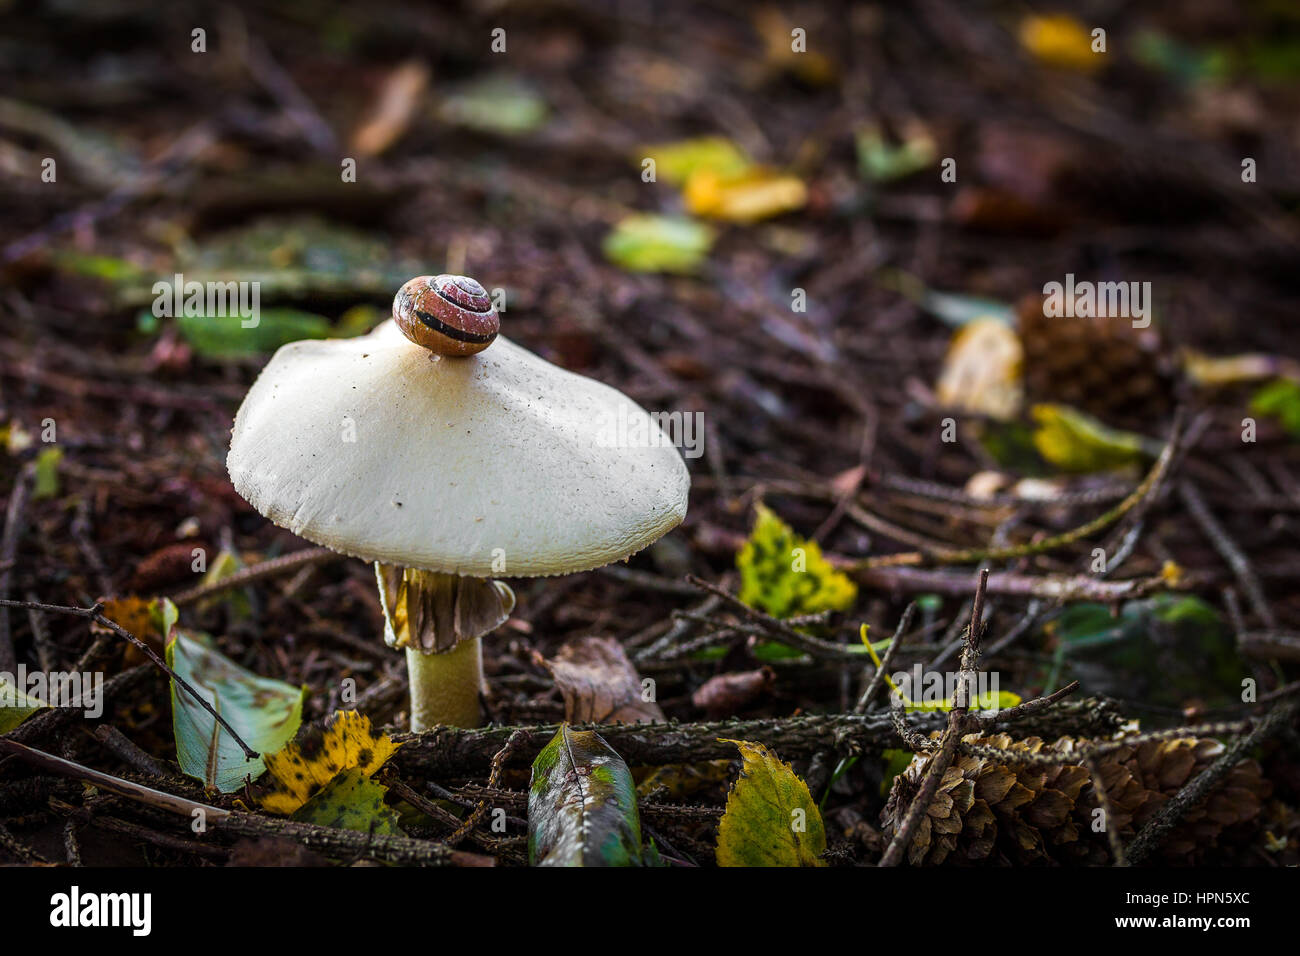 Snail on a Mushroom in the forest Stock Photo